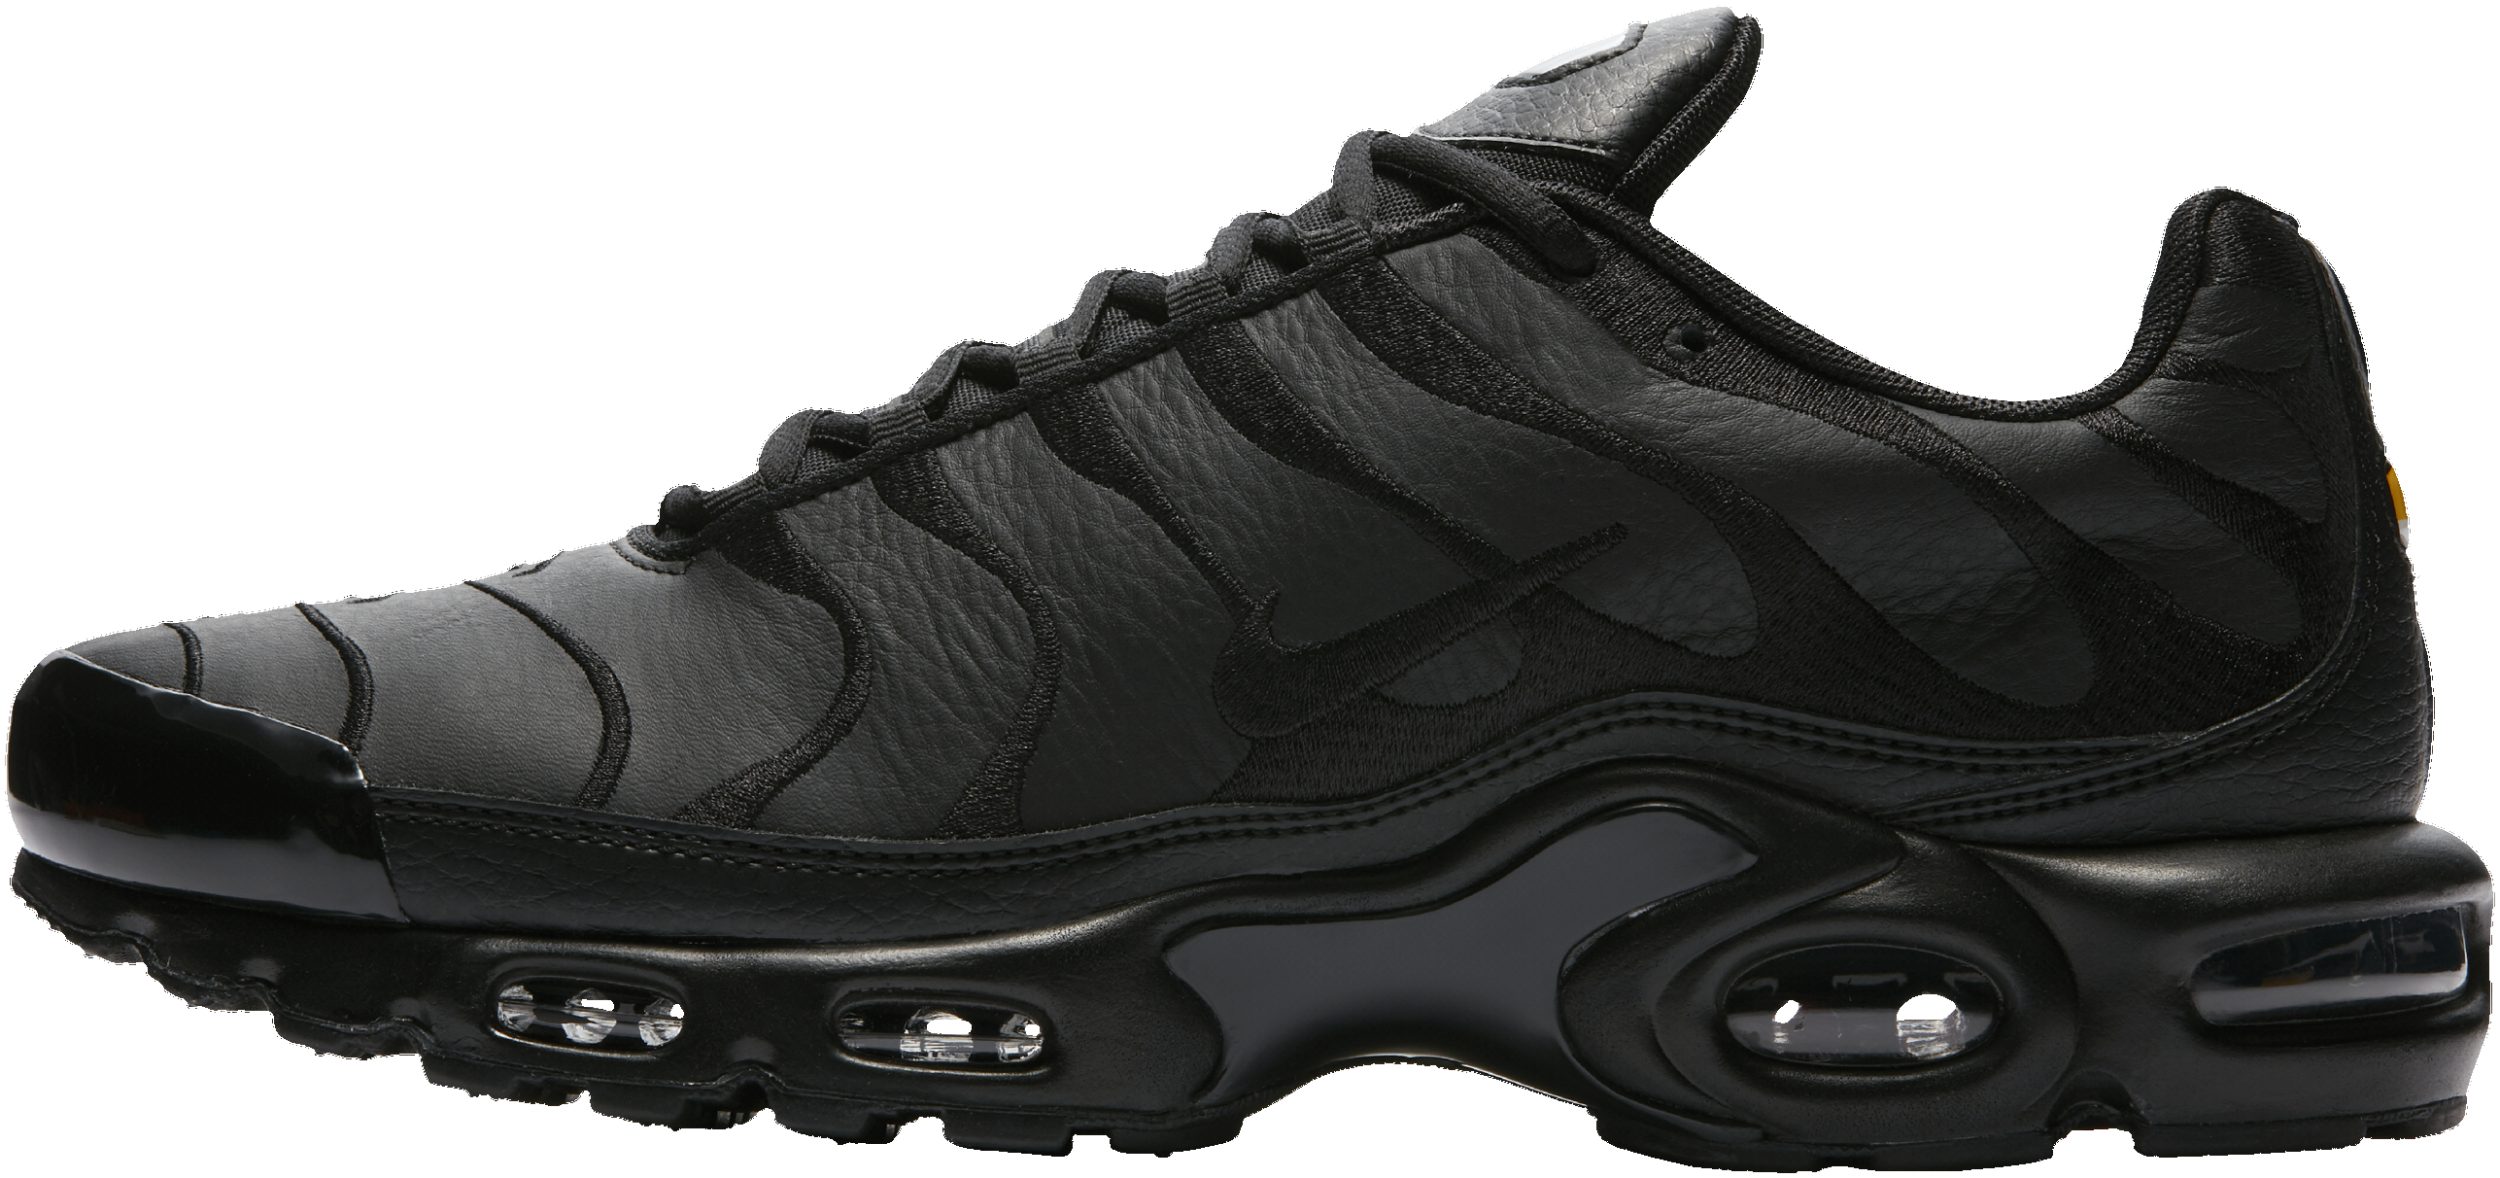 Only $115 + Review of Nike Air Max Plus 